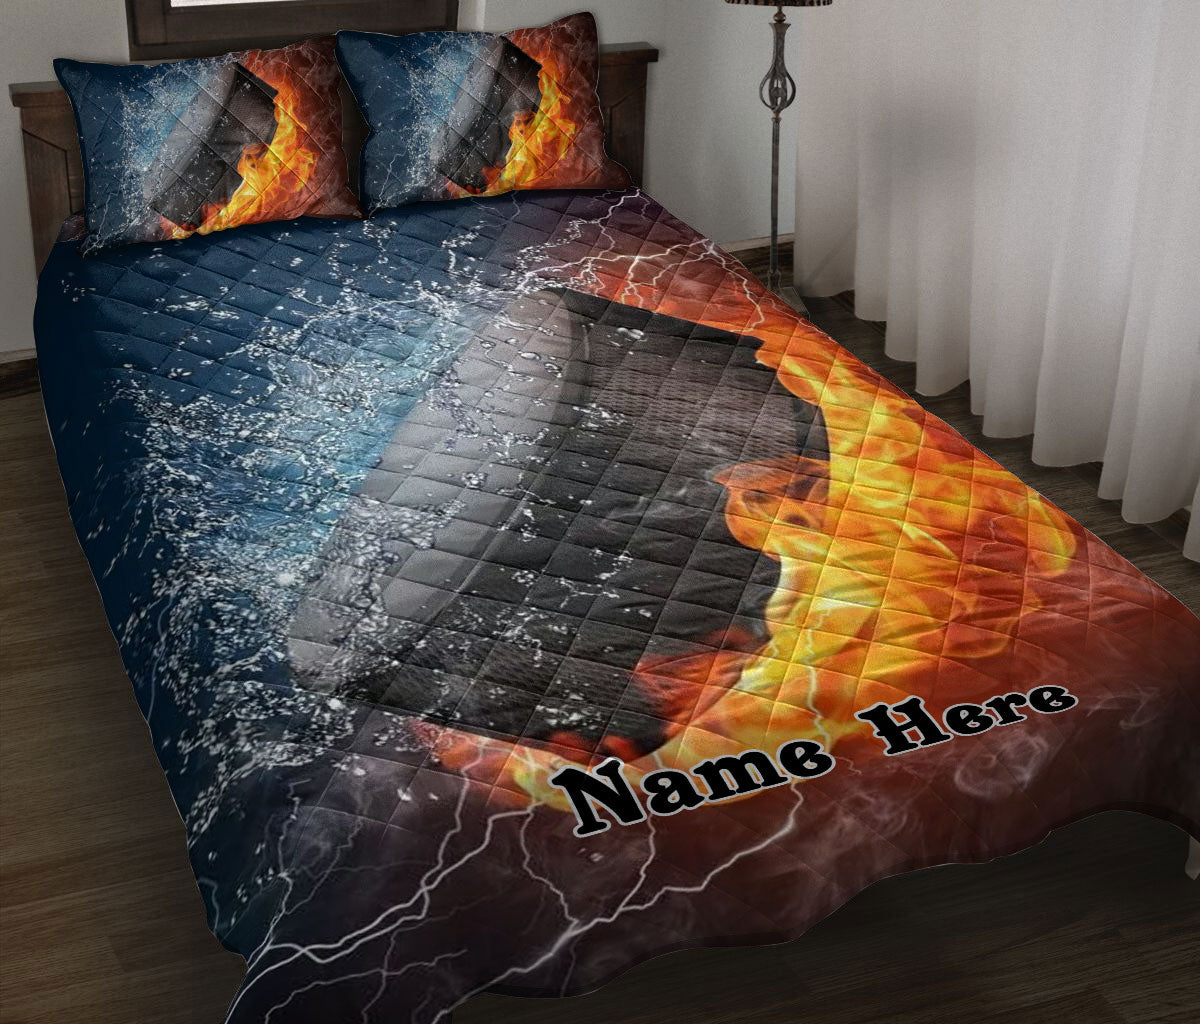 Ohaprints-Quilt-Bed-Set-Pillowcase-Hockey-Puck-Fire-&-Water-Unique-Sports-Gift-Idea-Custom-Personalized-Name-Blanket-Bedspread-Bedding-2696-Throw (55'' x 60'')